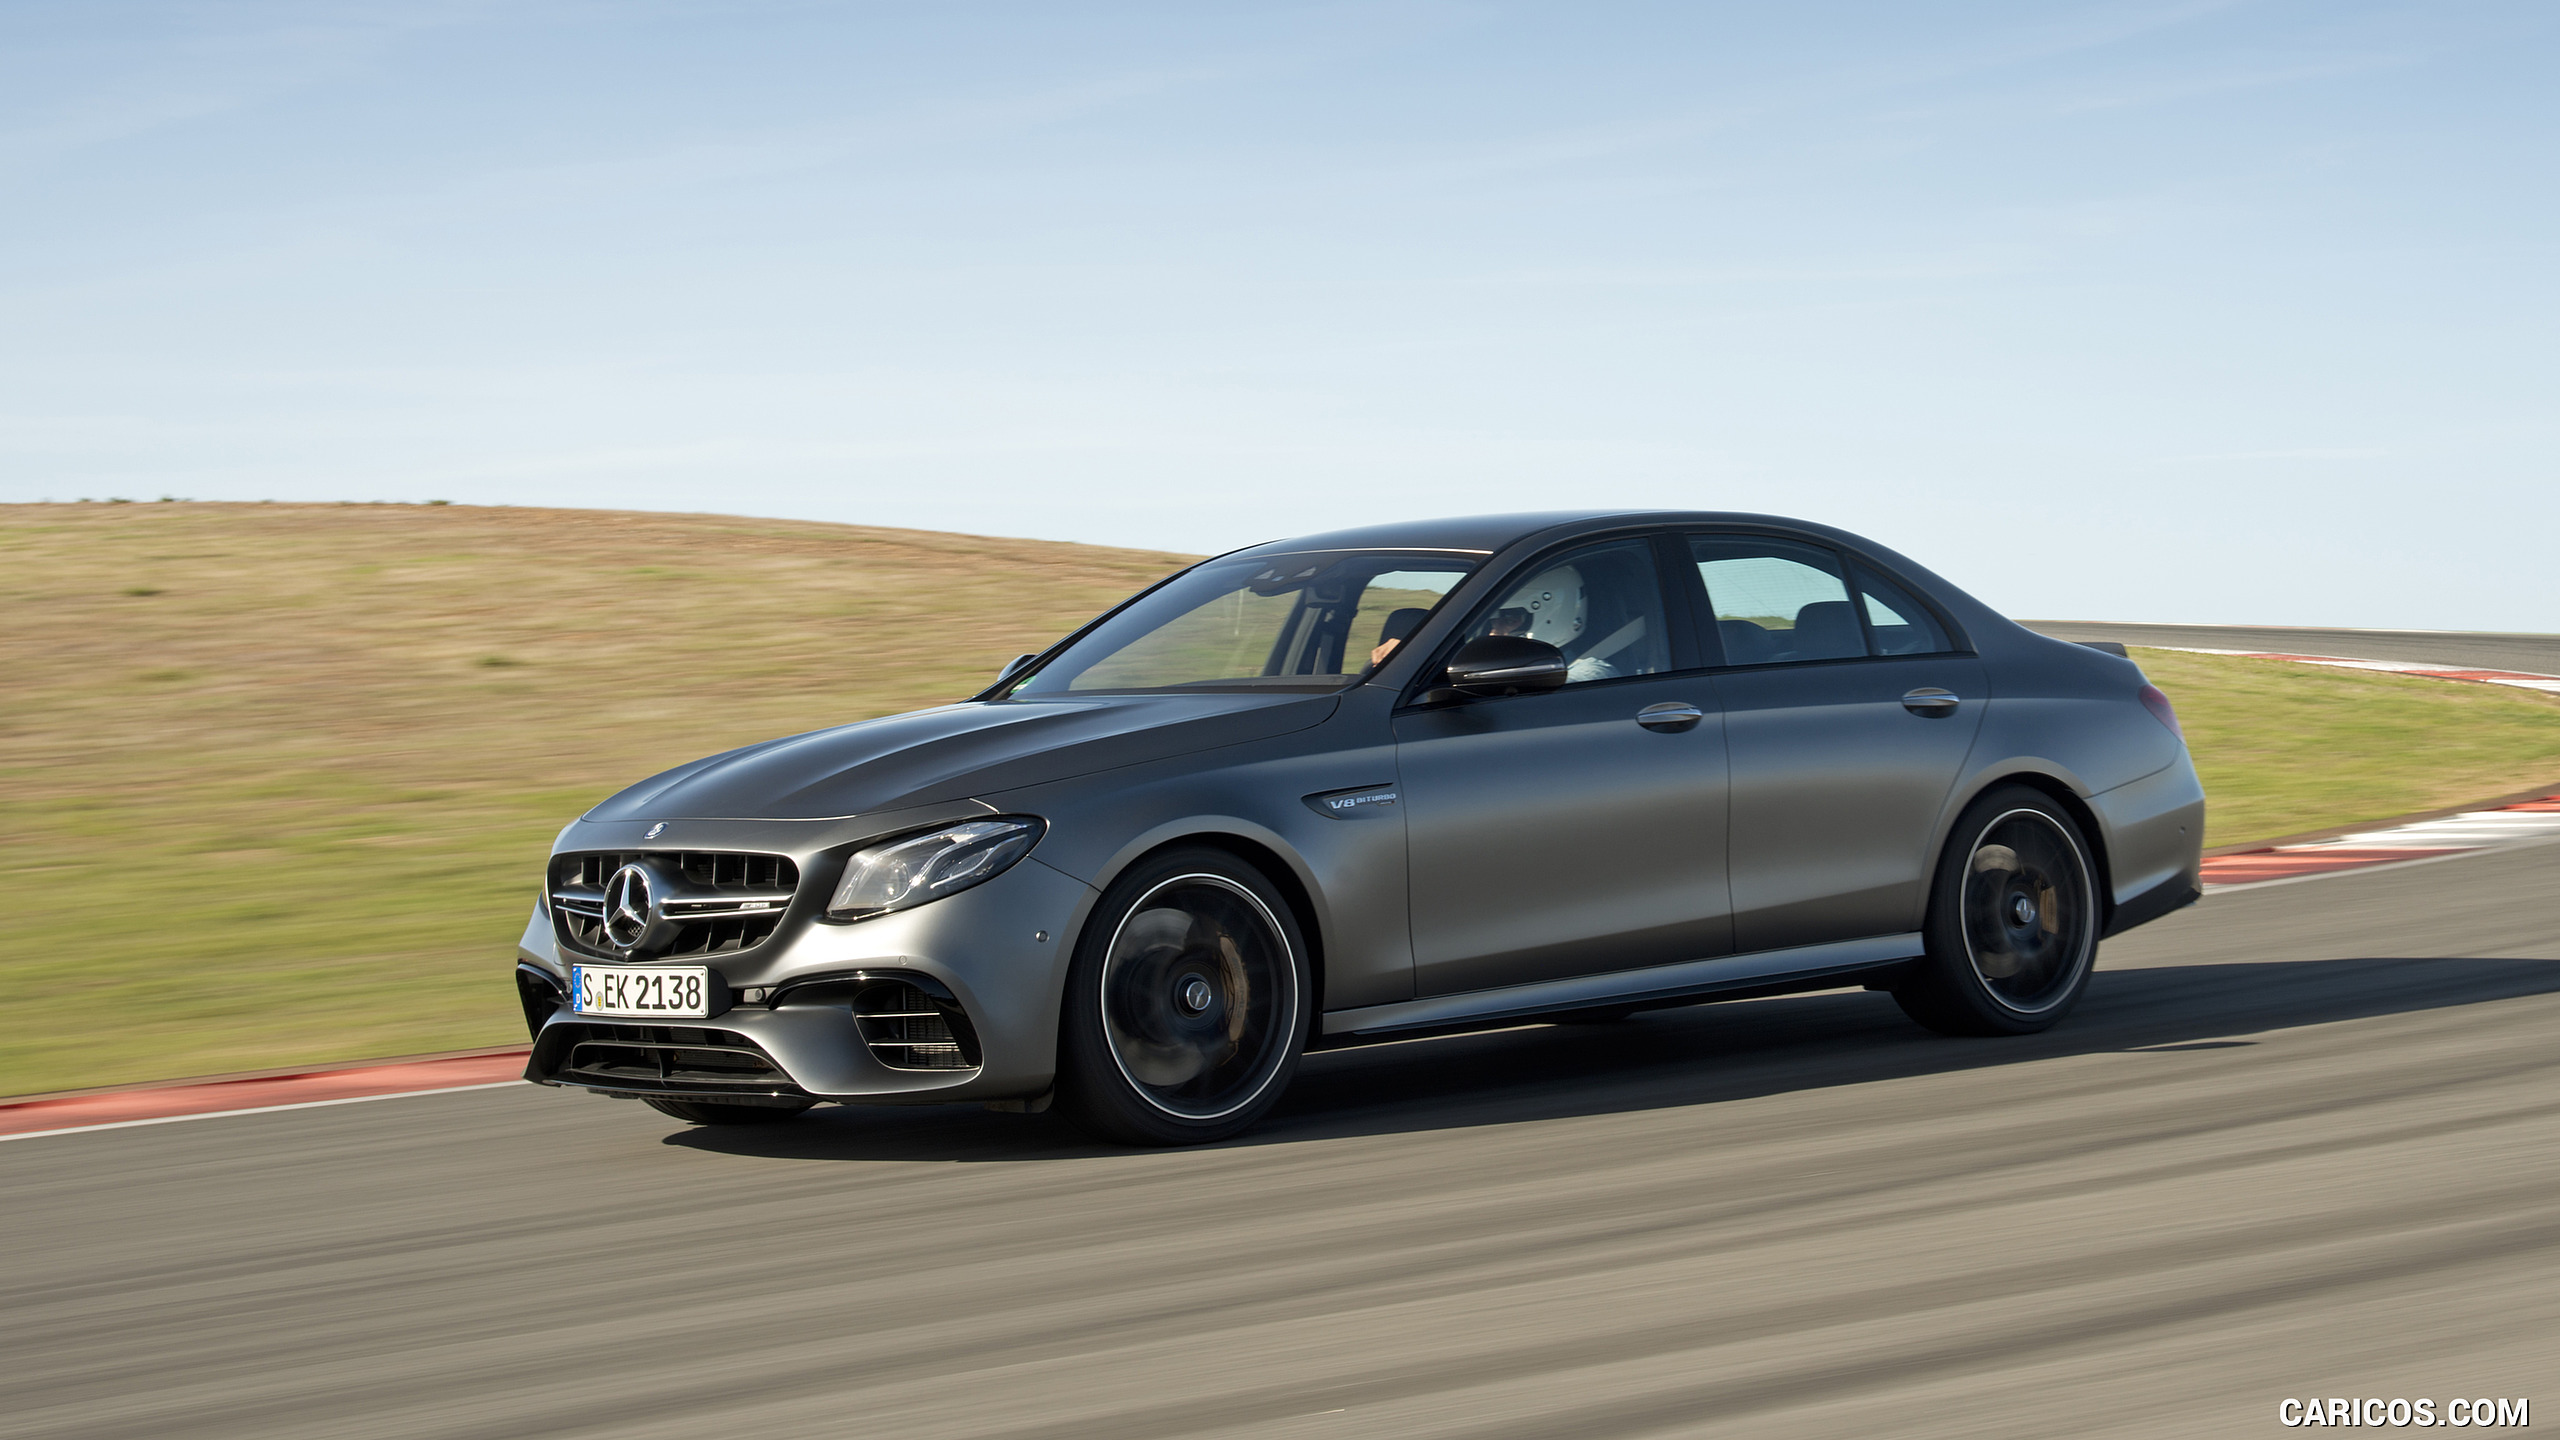 2018 Mercedes-AMG E63 S 4MATIC+ - Side, #268 of 323